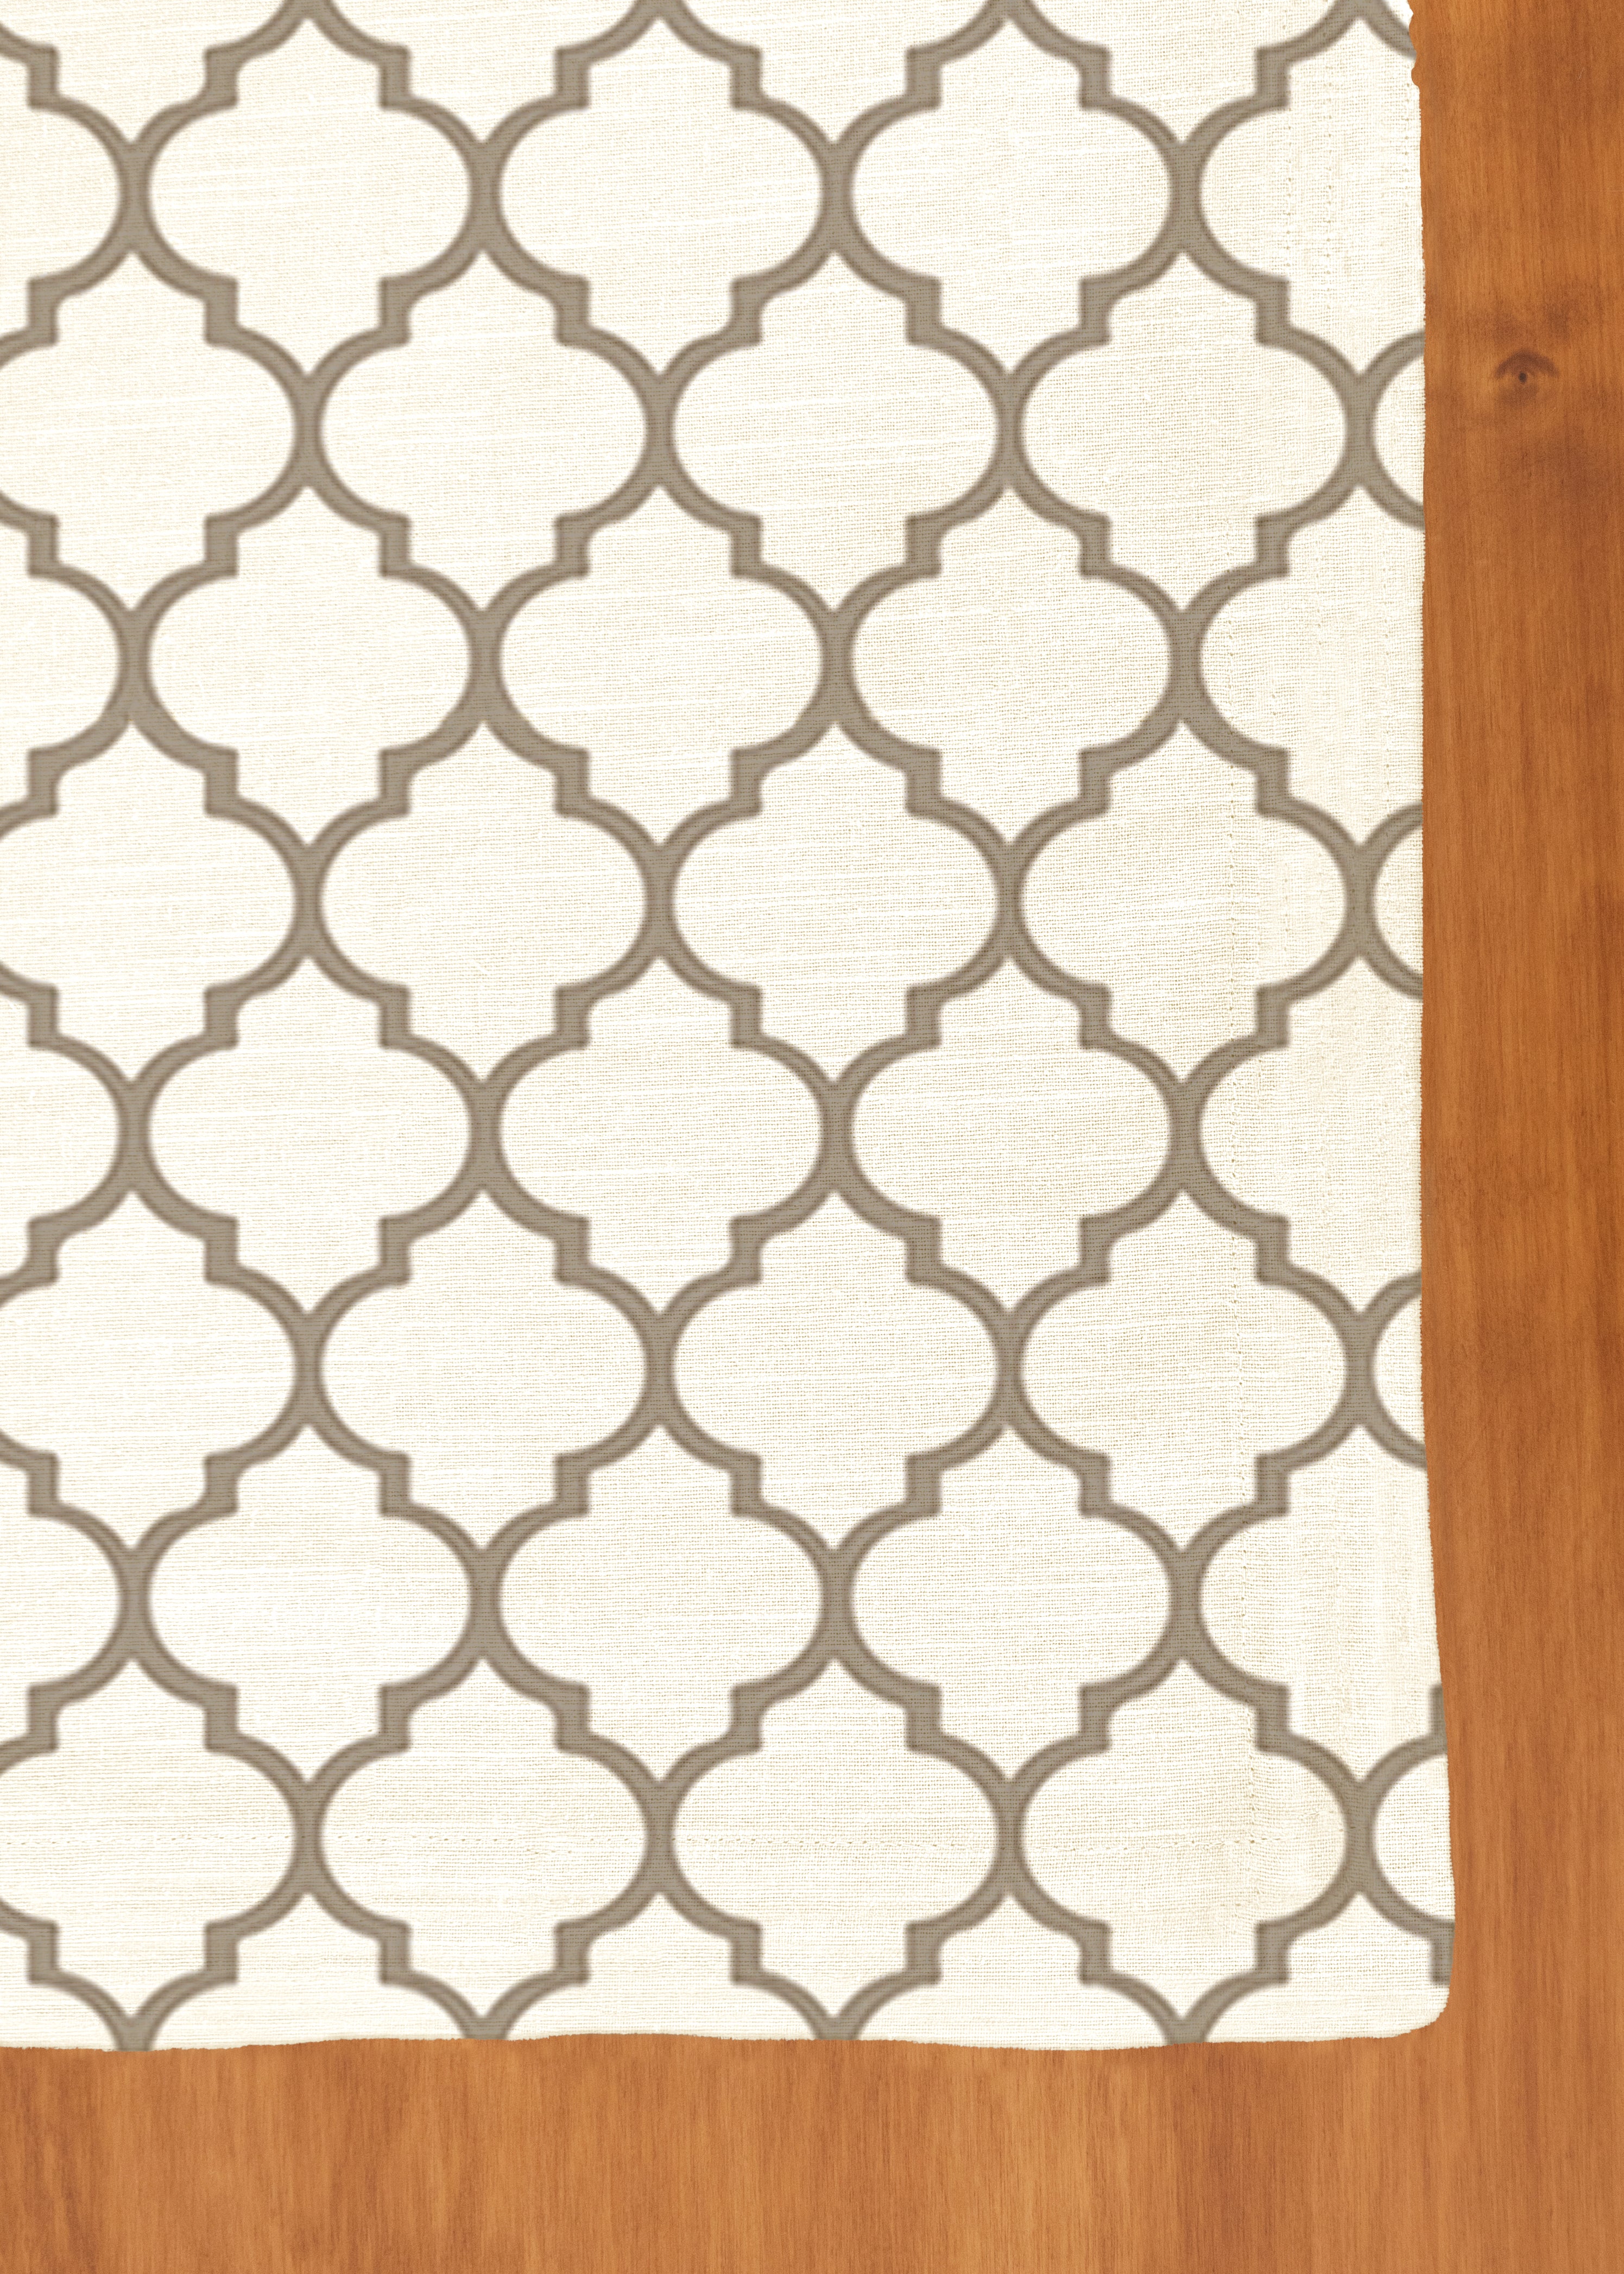 Trellis Printed 100% cotton geometric table cloth for 4 seater or 6 seater dining - Walnut Grey